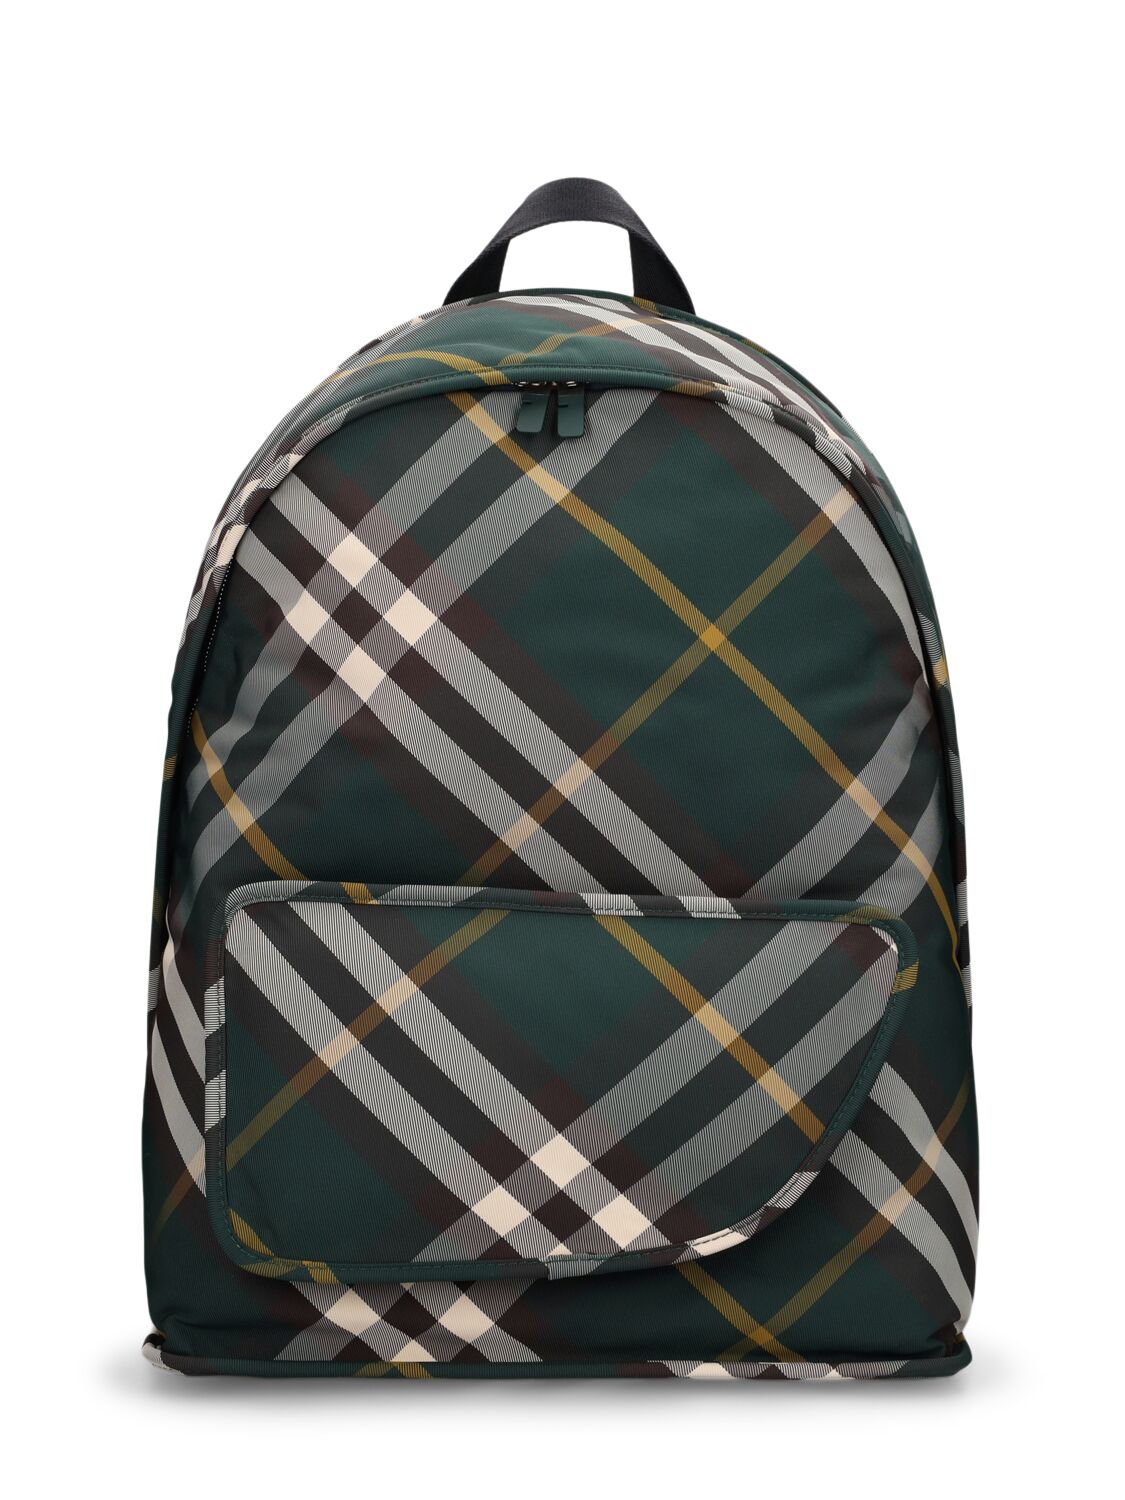 Burberry Shield Check Print Backpack In Black